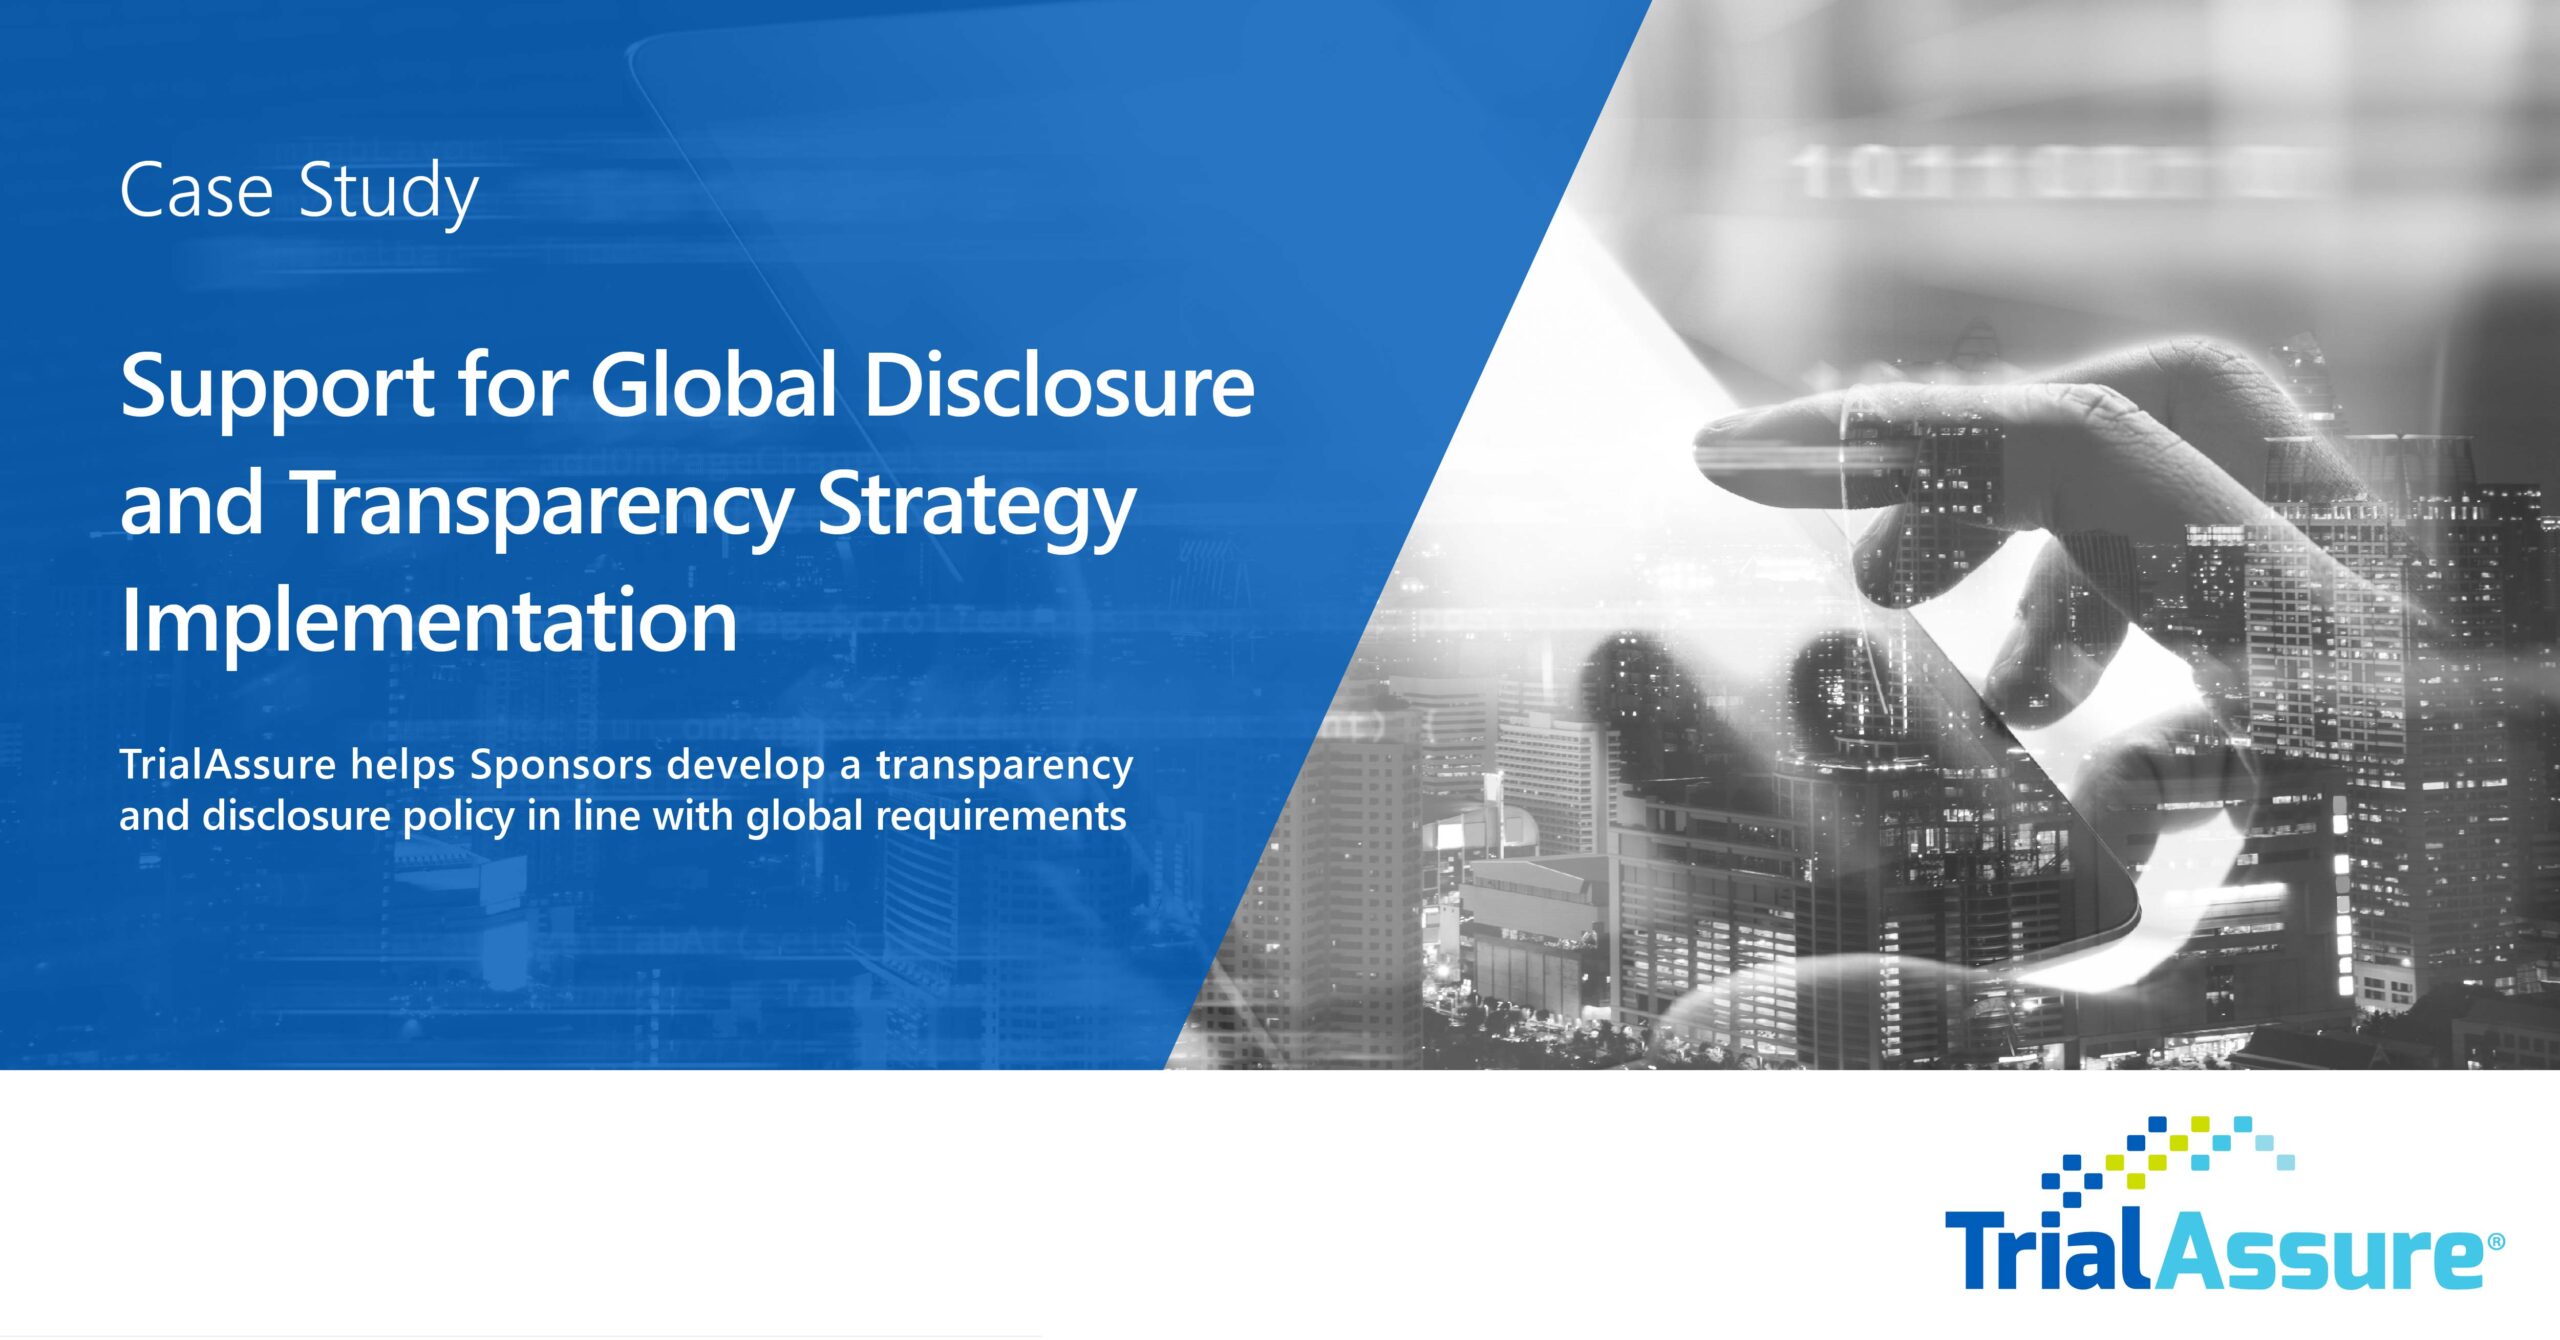 Support for Global Disclosure and Transparency Strategy Implementation